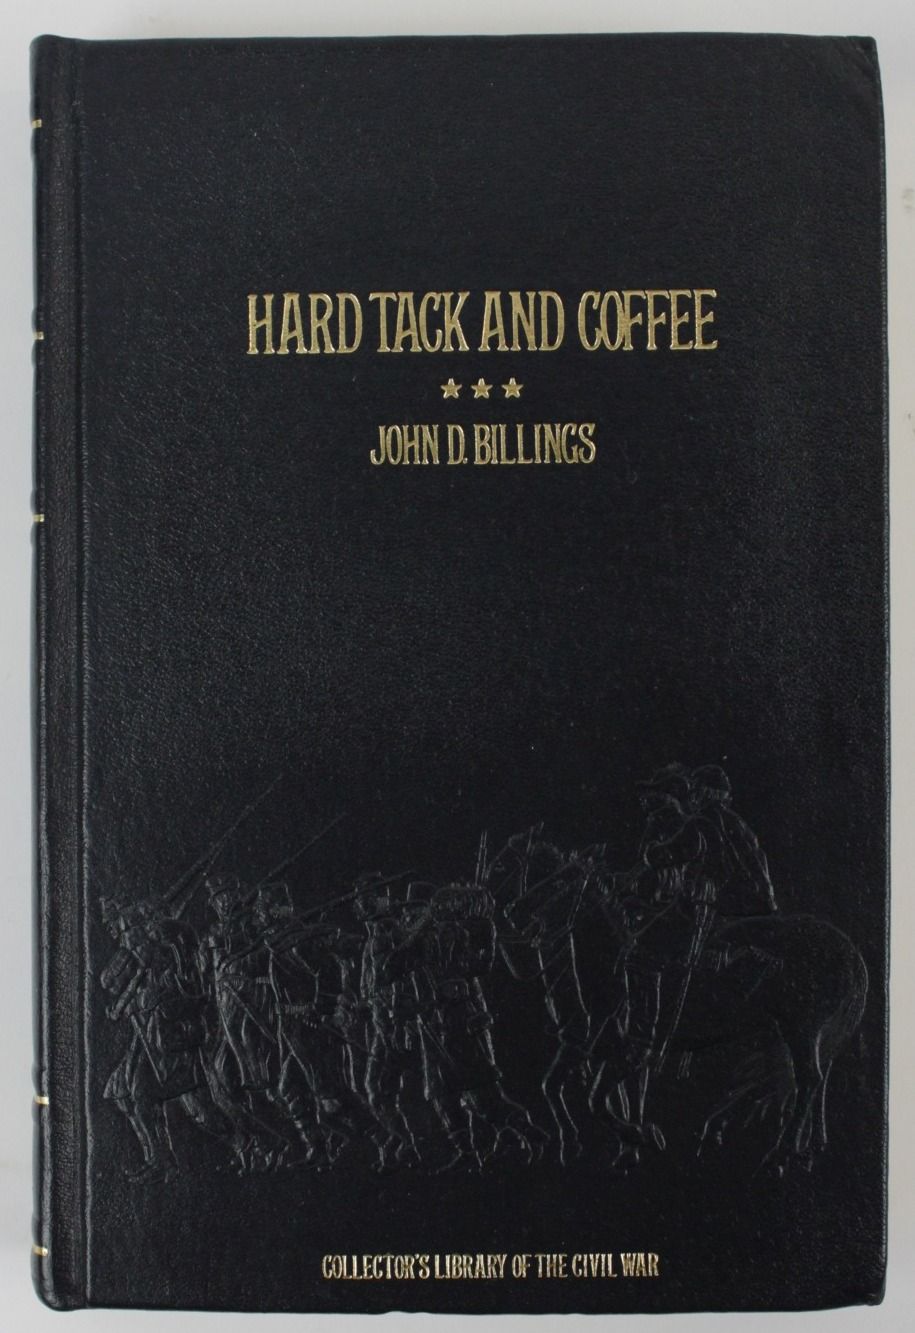 Hardtack and Coffee, or The Unwritten Story of Army Life (= Collector's Library of the Civil War) - Billings, John Davis